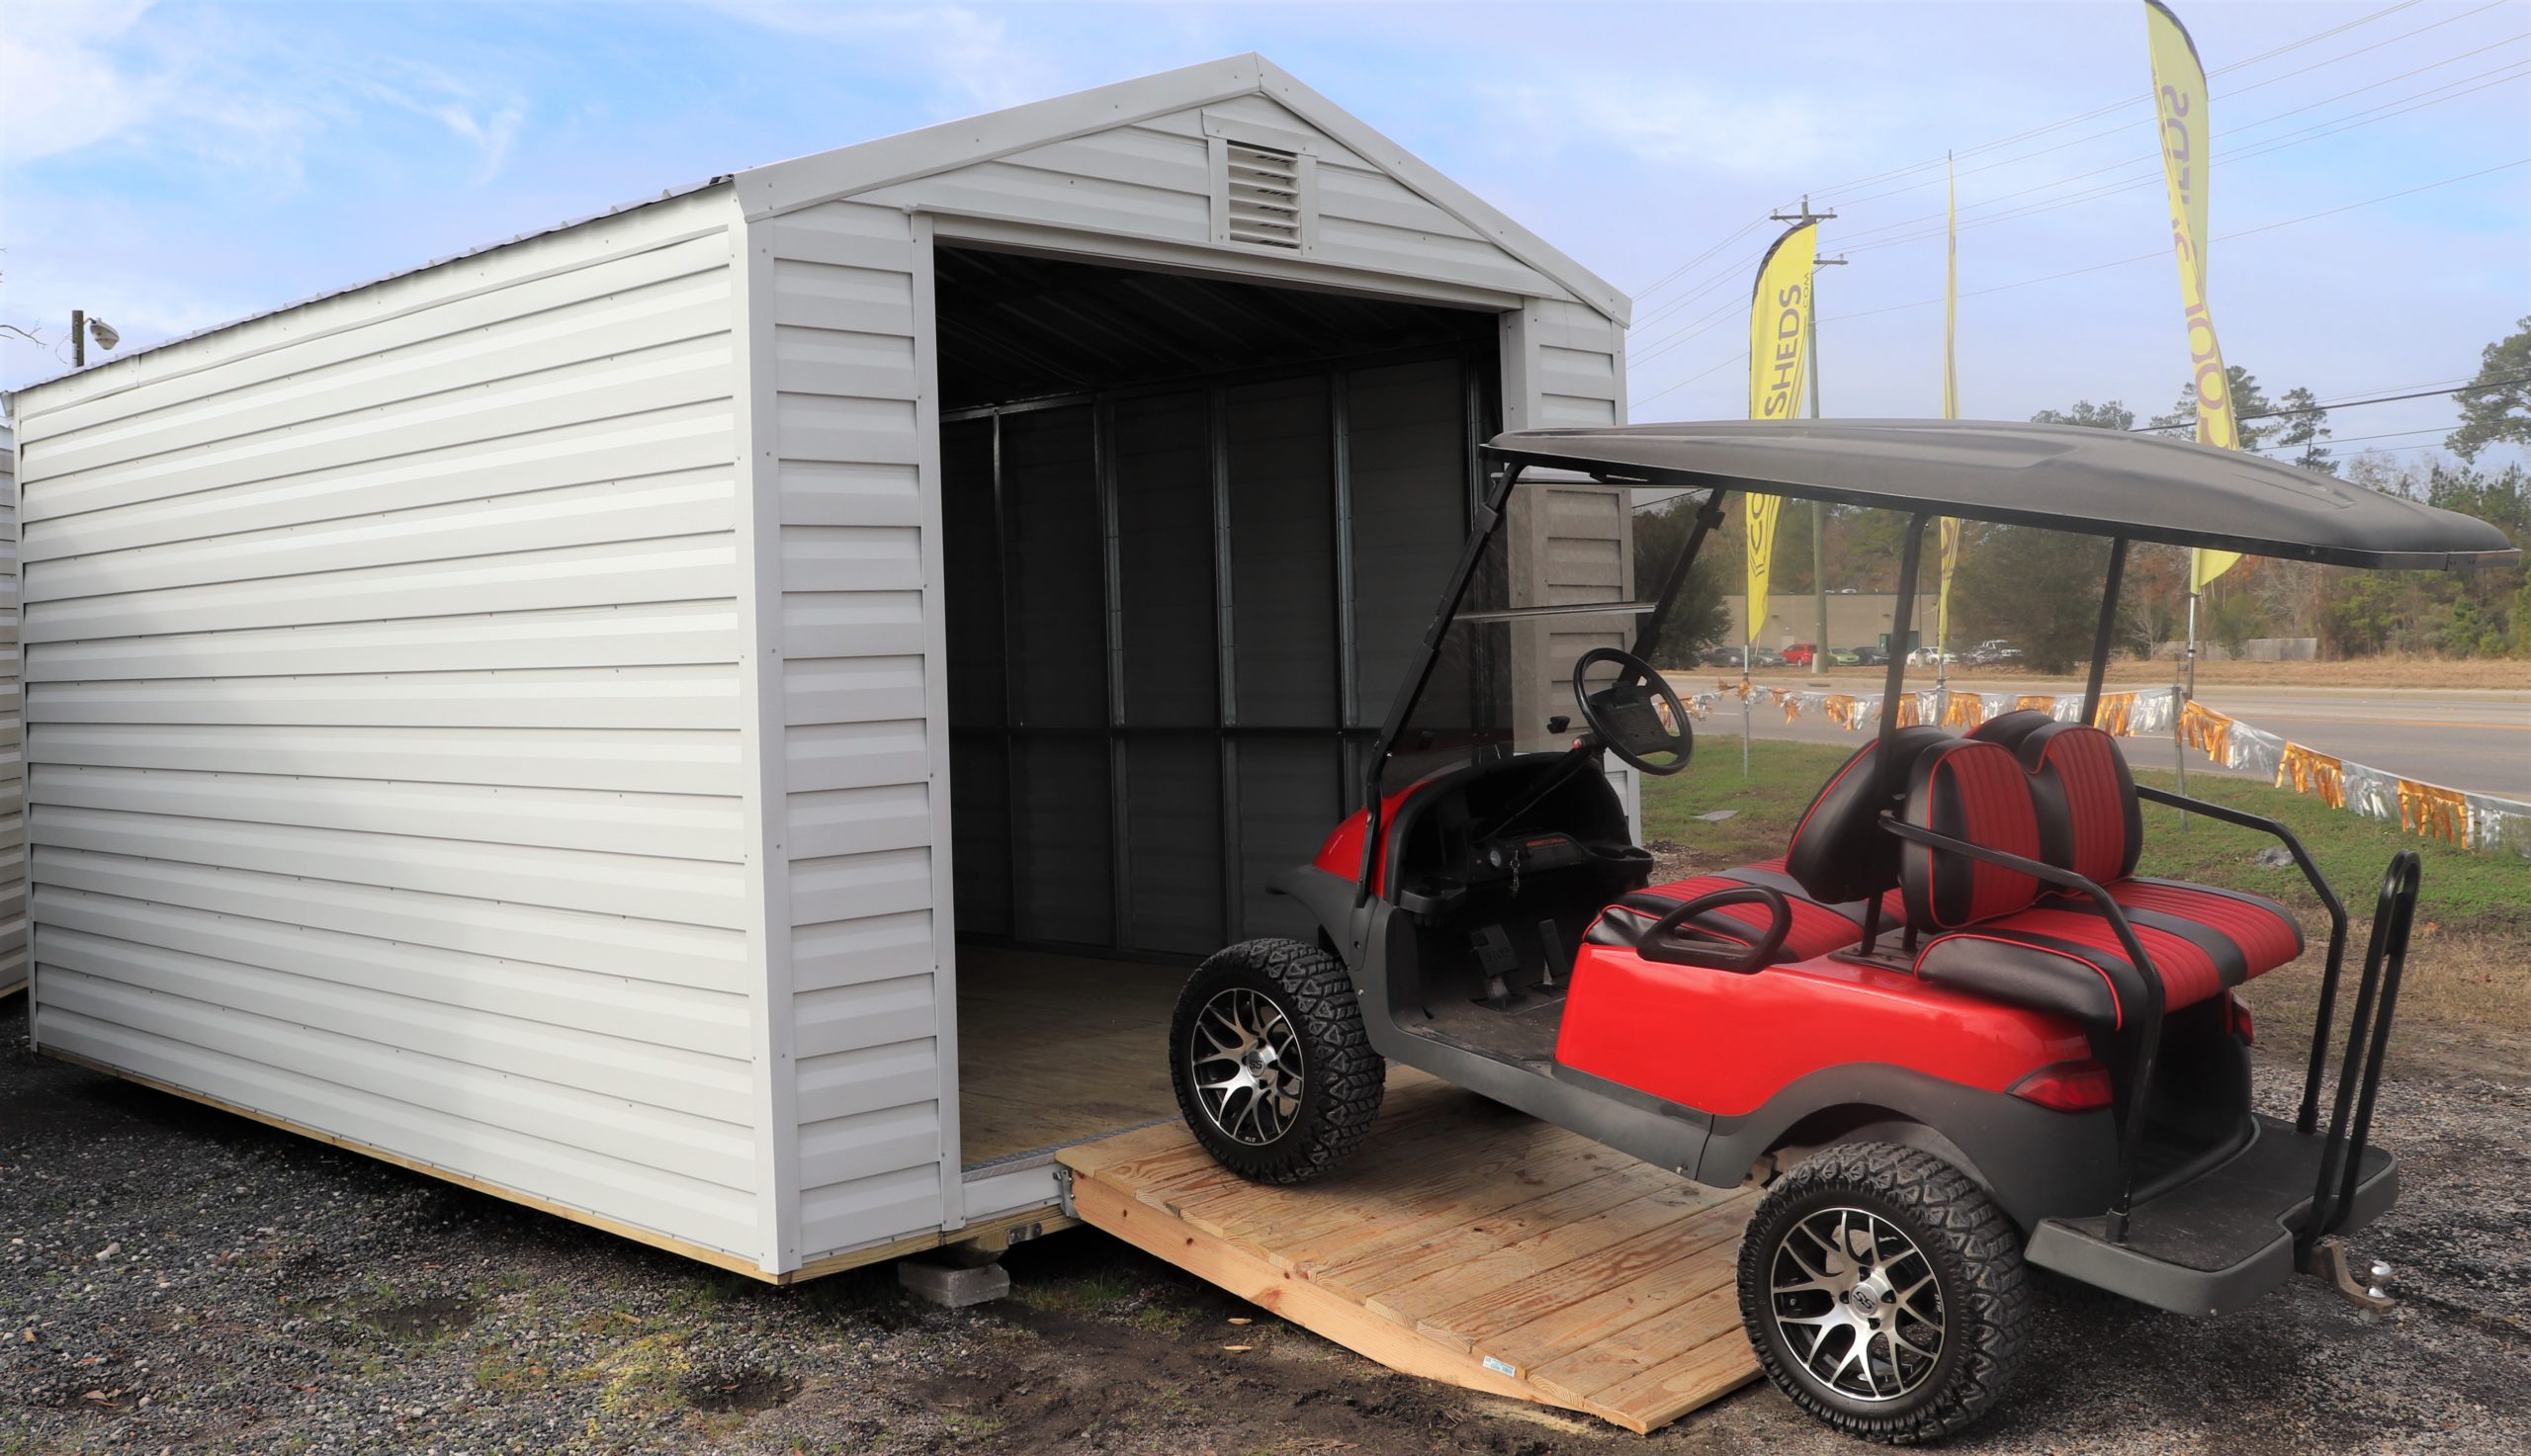 Lean to shed for golf cart